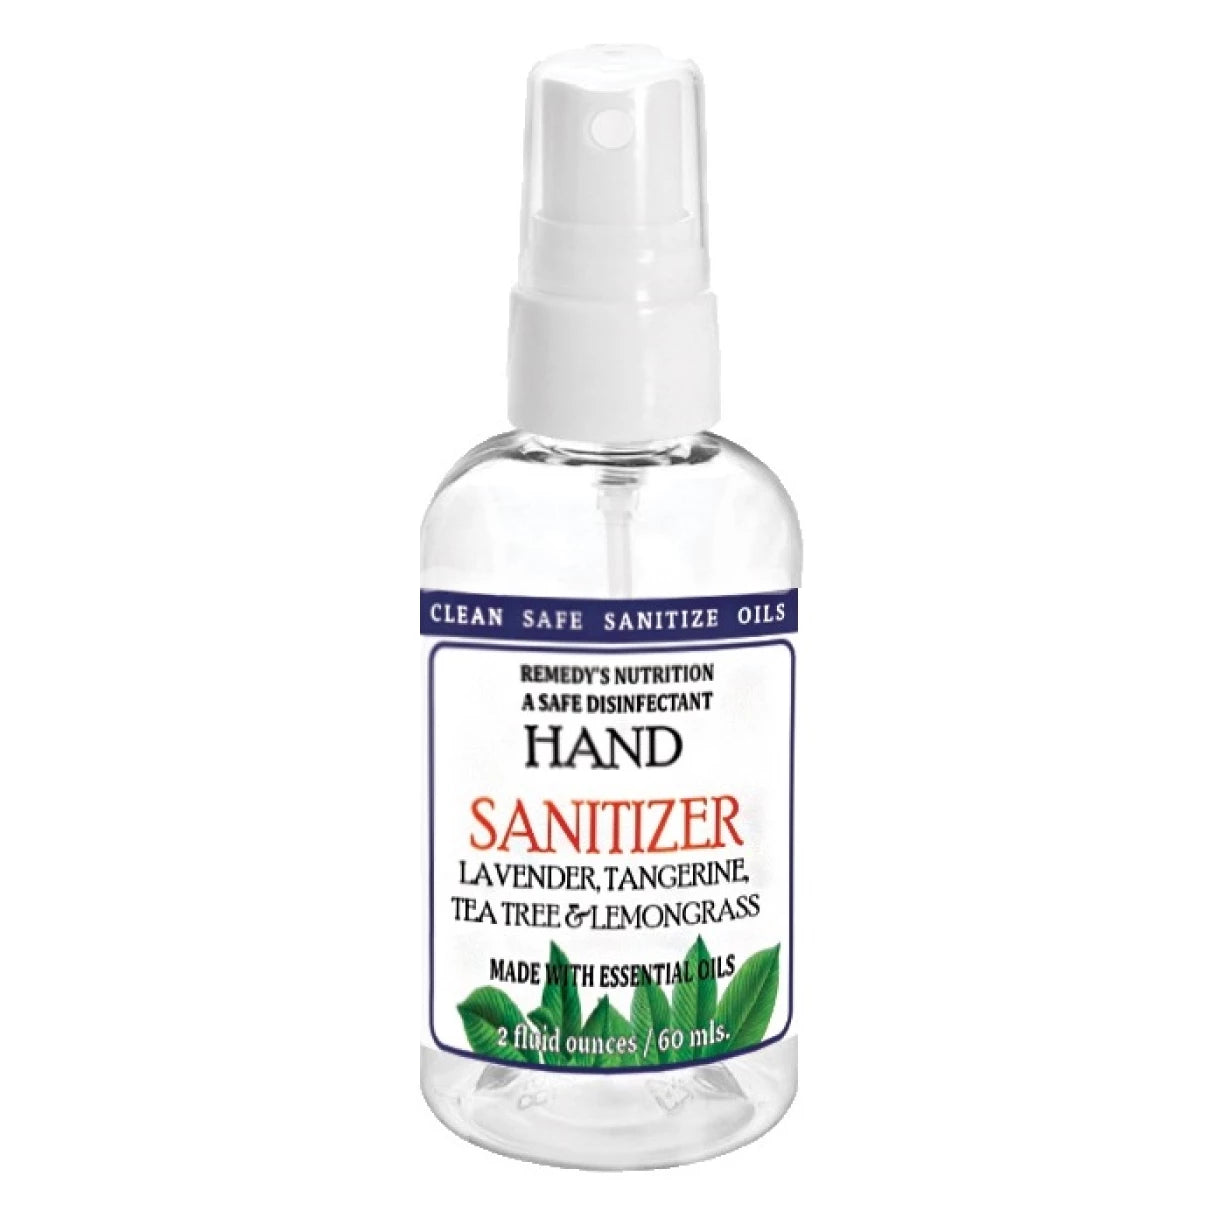 Santie Oil Company  Hand Sanitizer-Isopropyl Alcohol Antiseptic (75%)  12/10 Ounce Case